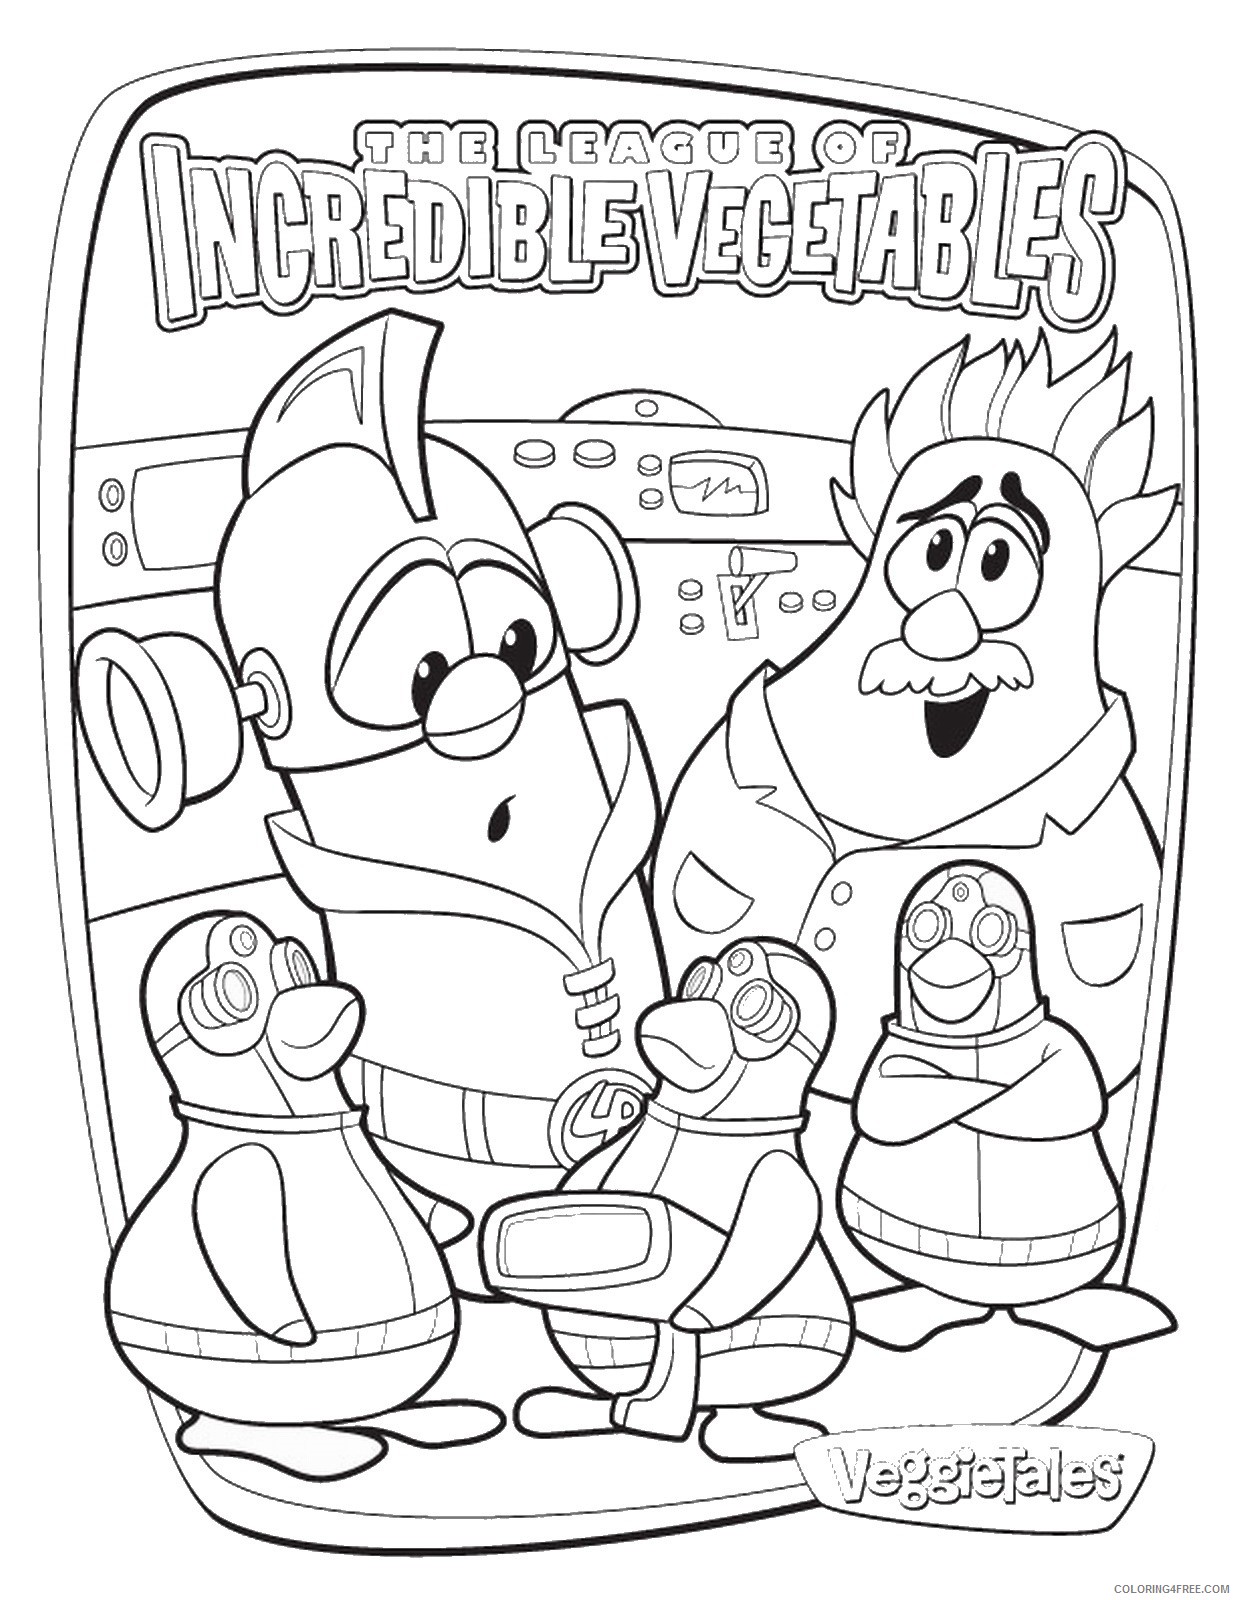 VeggieTales Coloring Pages Cartoons Veggie Tales Sheets Free Printable 2020 6864 Coloring4free